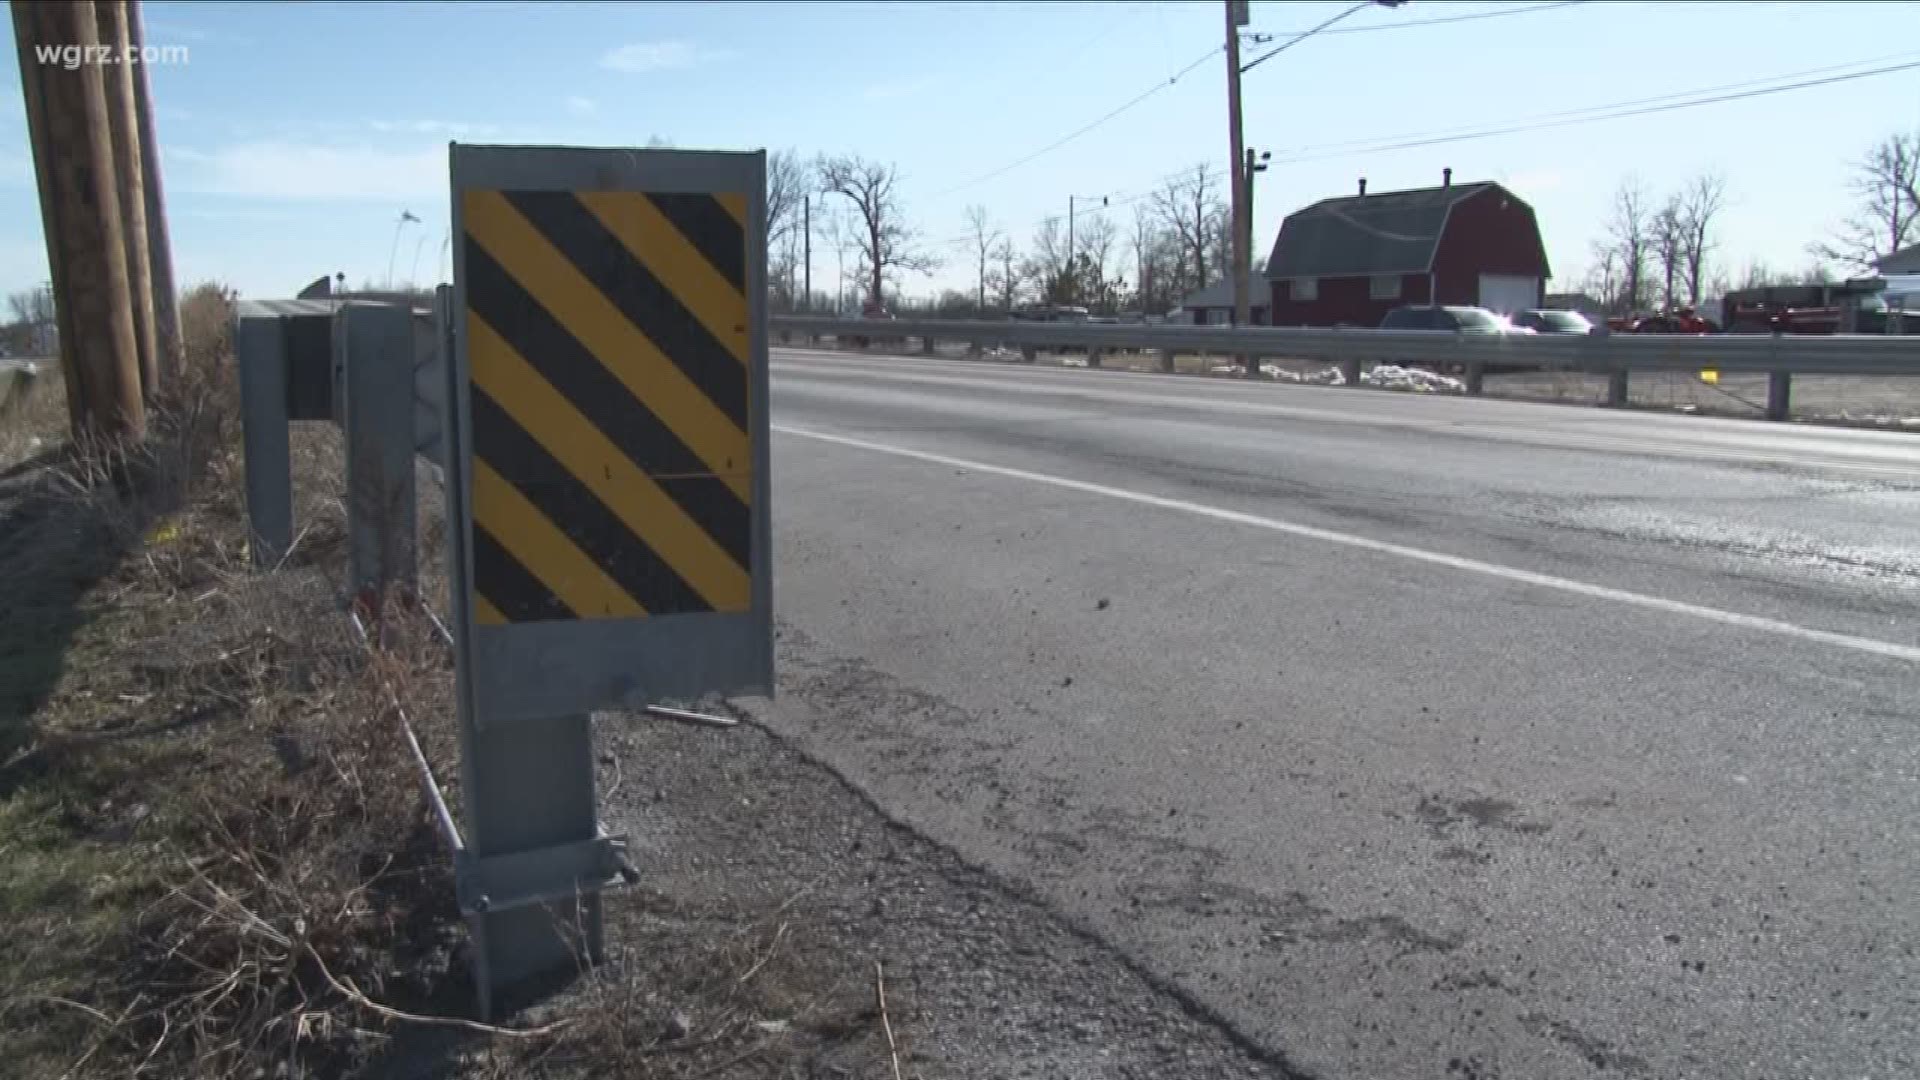 X-Lite guard rails are coming down in Erie County.